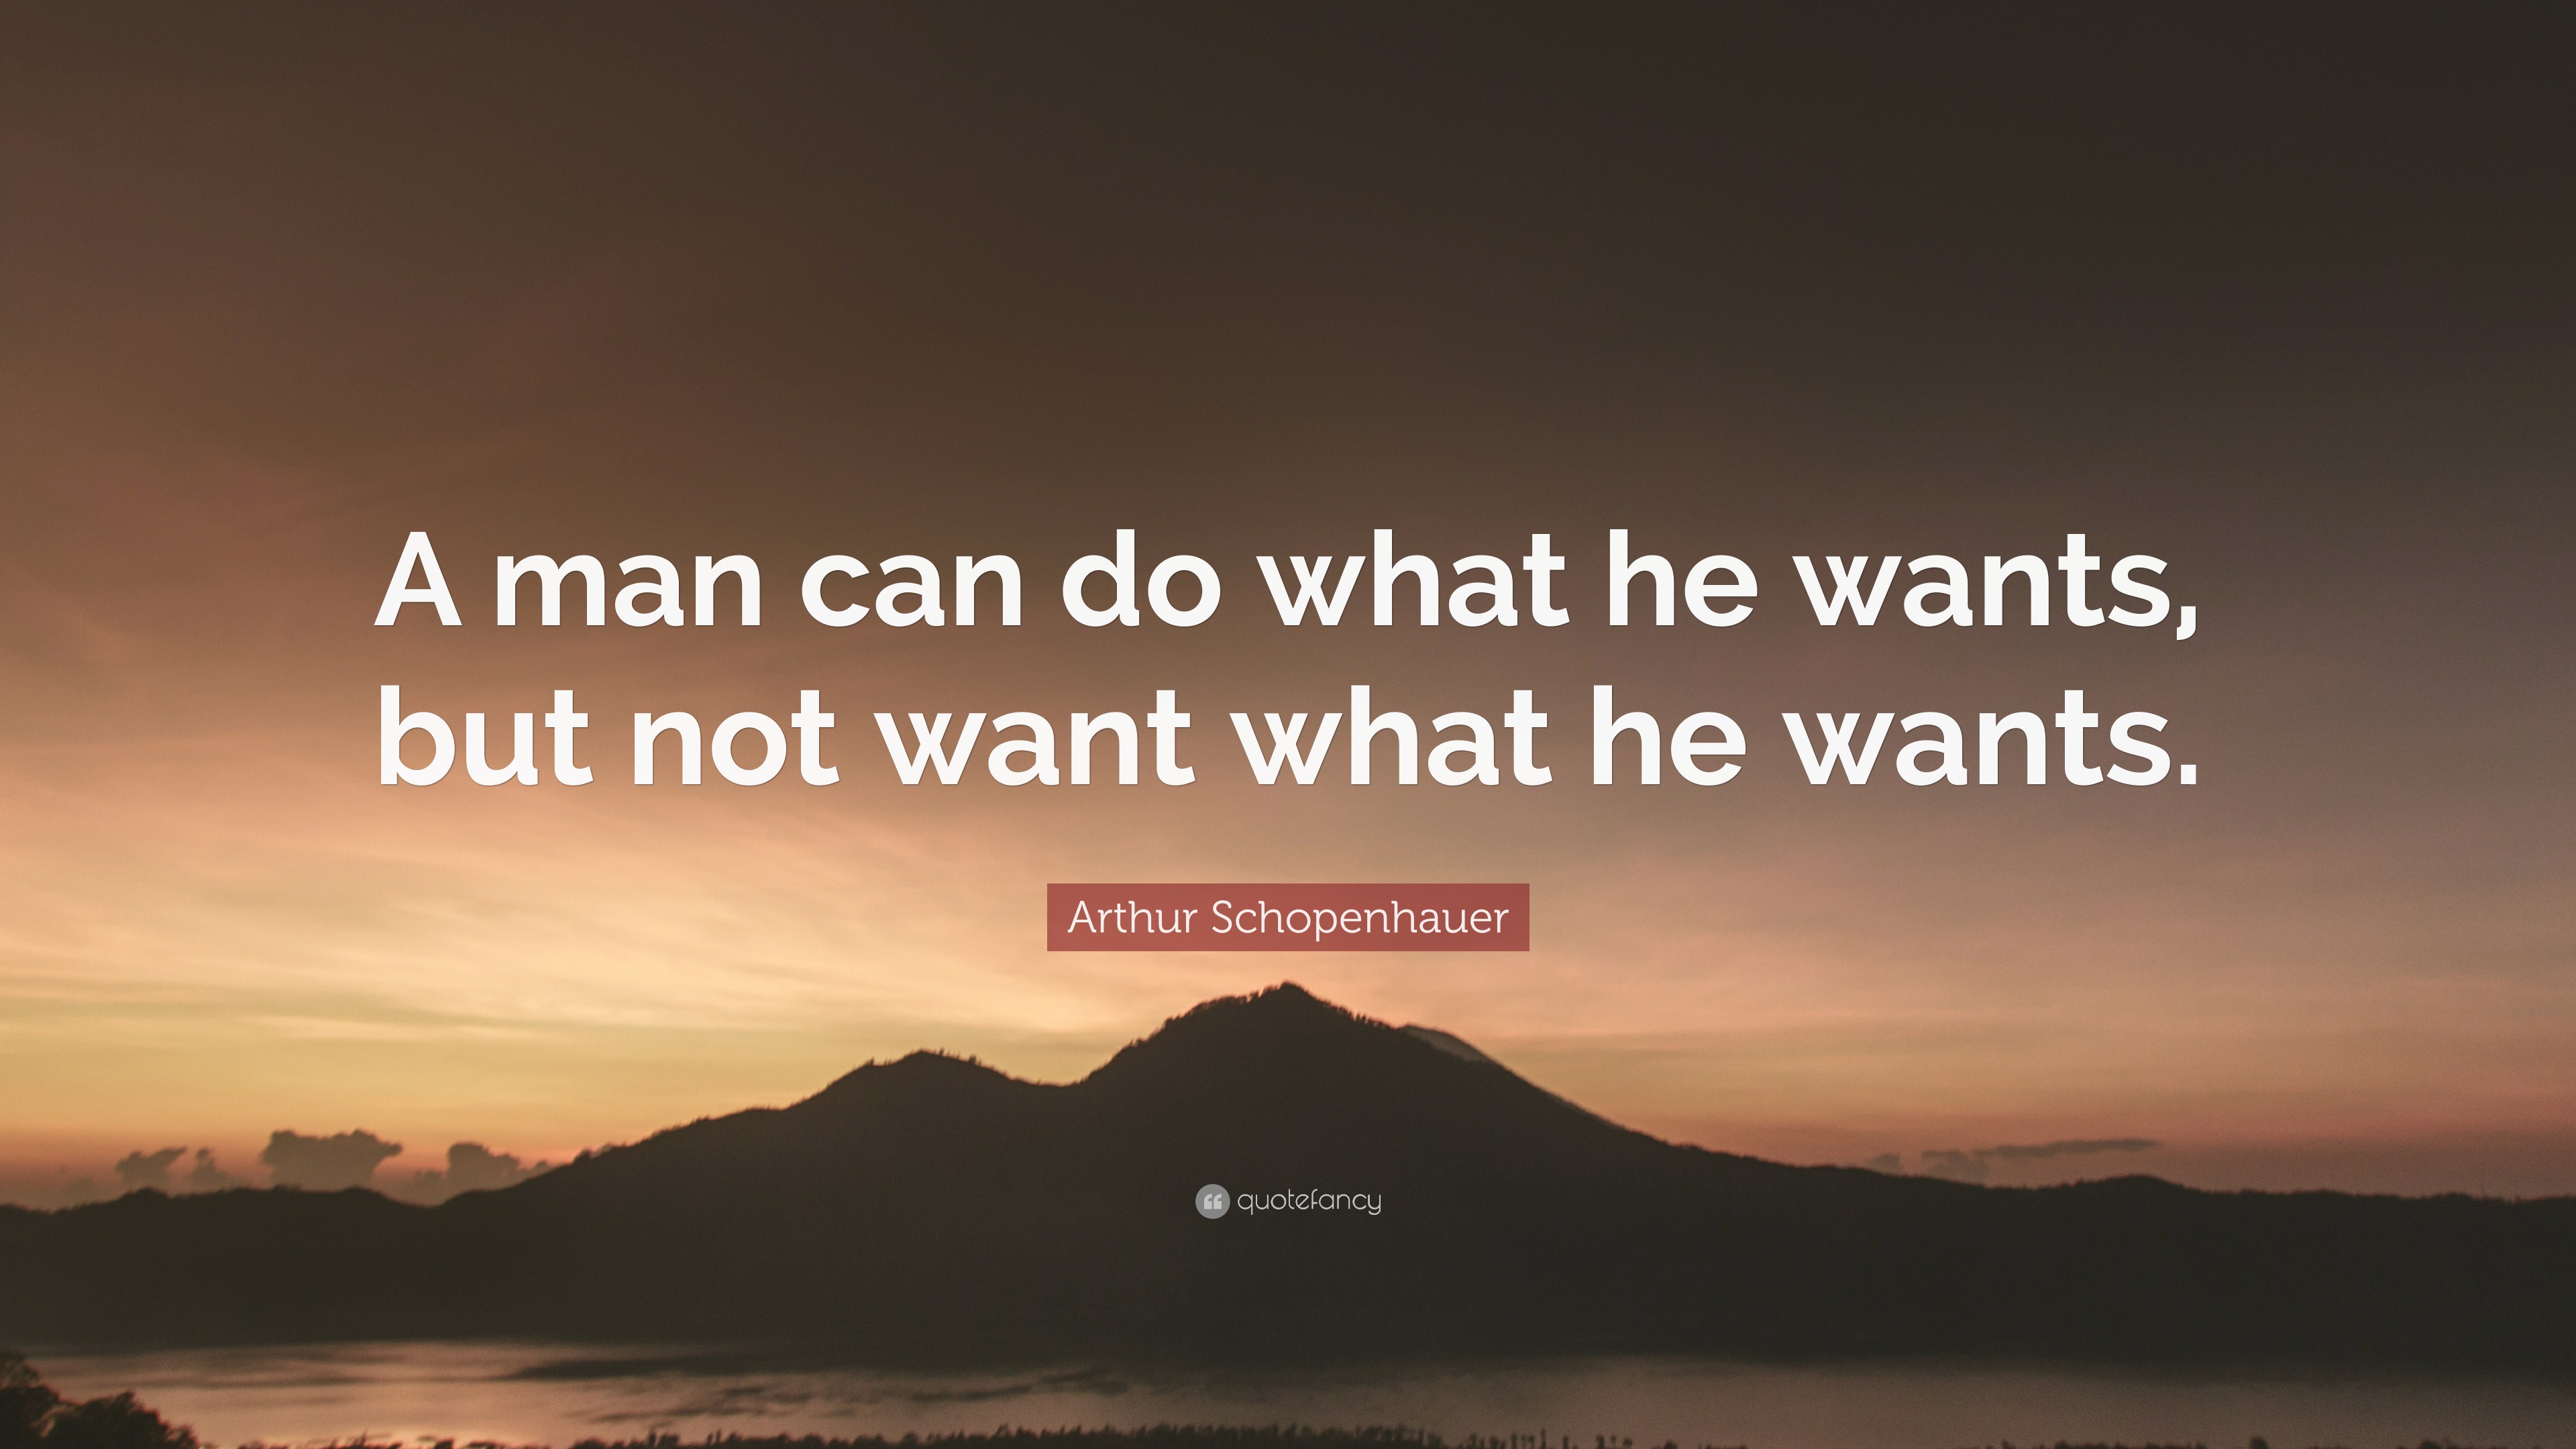 Arthur Schopenhauer Quote A Man Can Do What He Wants But Not Want What He Wants